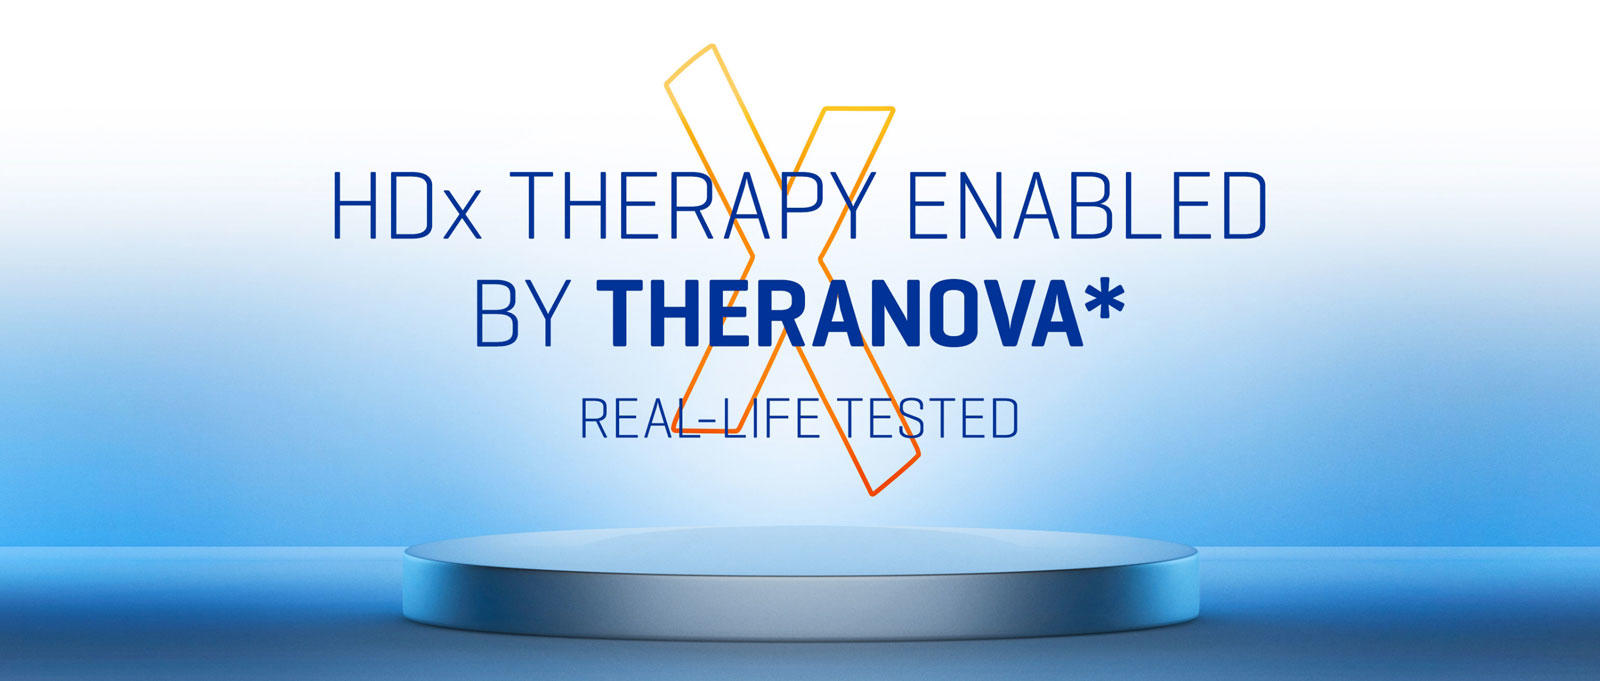 HDx Therapy Enabled by theranova